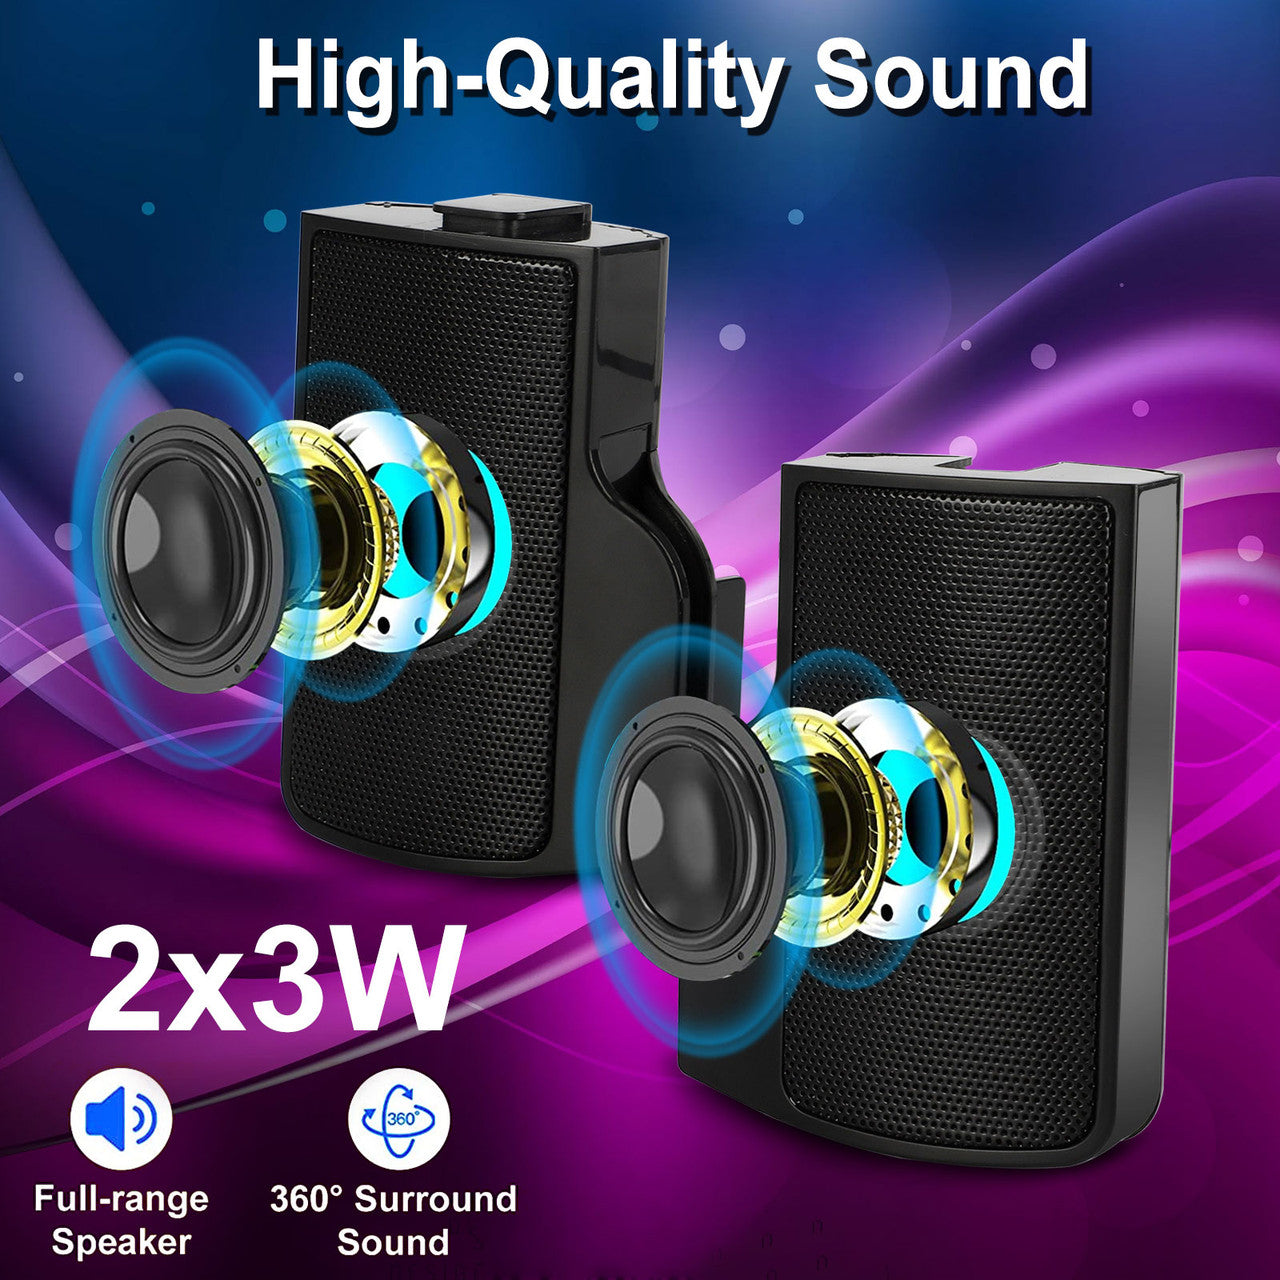 Detachable 2-in-1 PC Gaming Speaker with Stereo Sound, USB Powered 3.5mm Audio Input for Tablets Desktop Laptop Cellphone